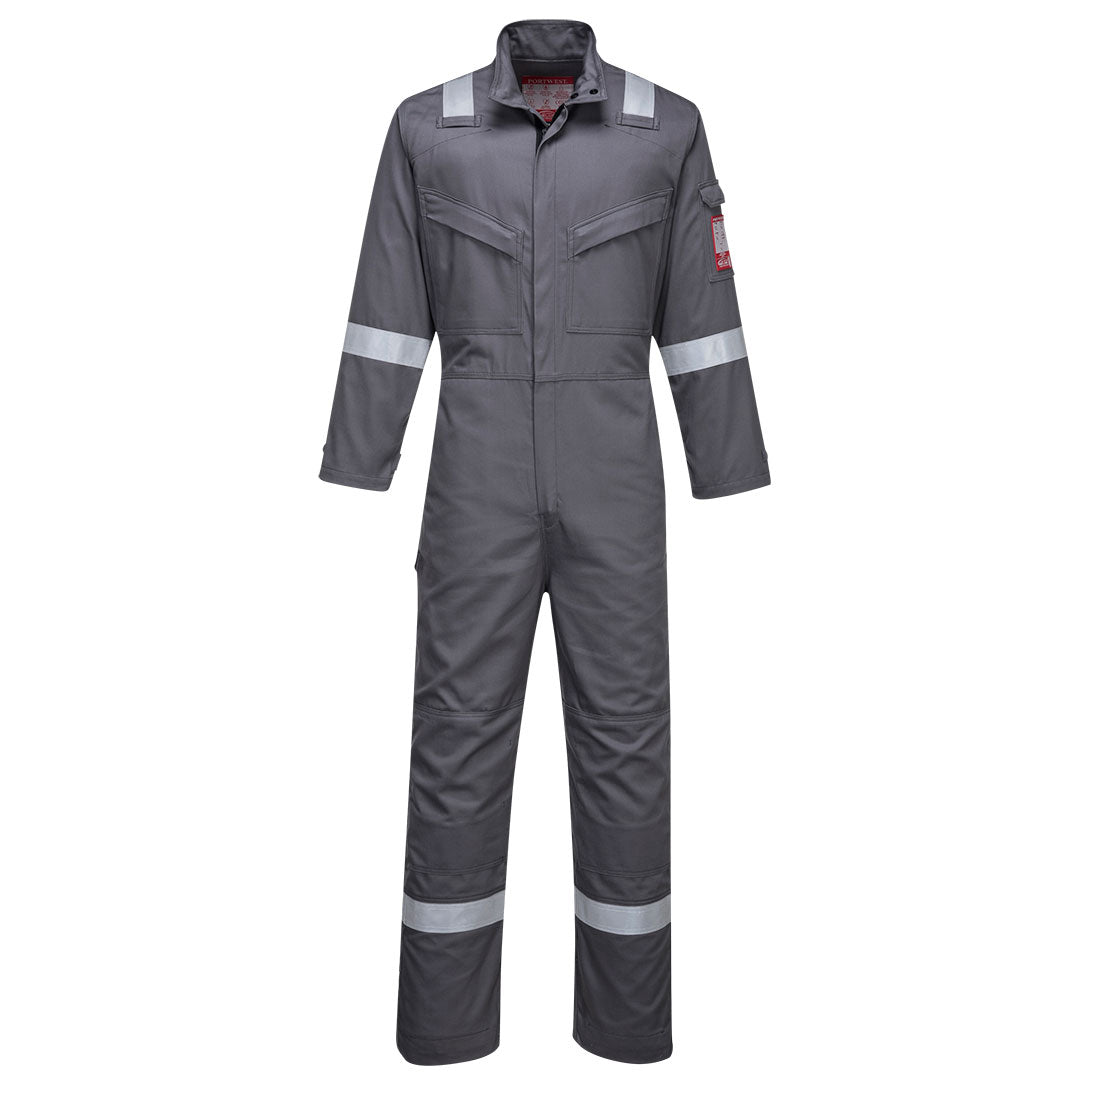 BizFlame Ultra™ Fireproof Electric Arc Coverall